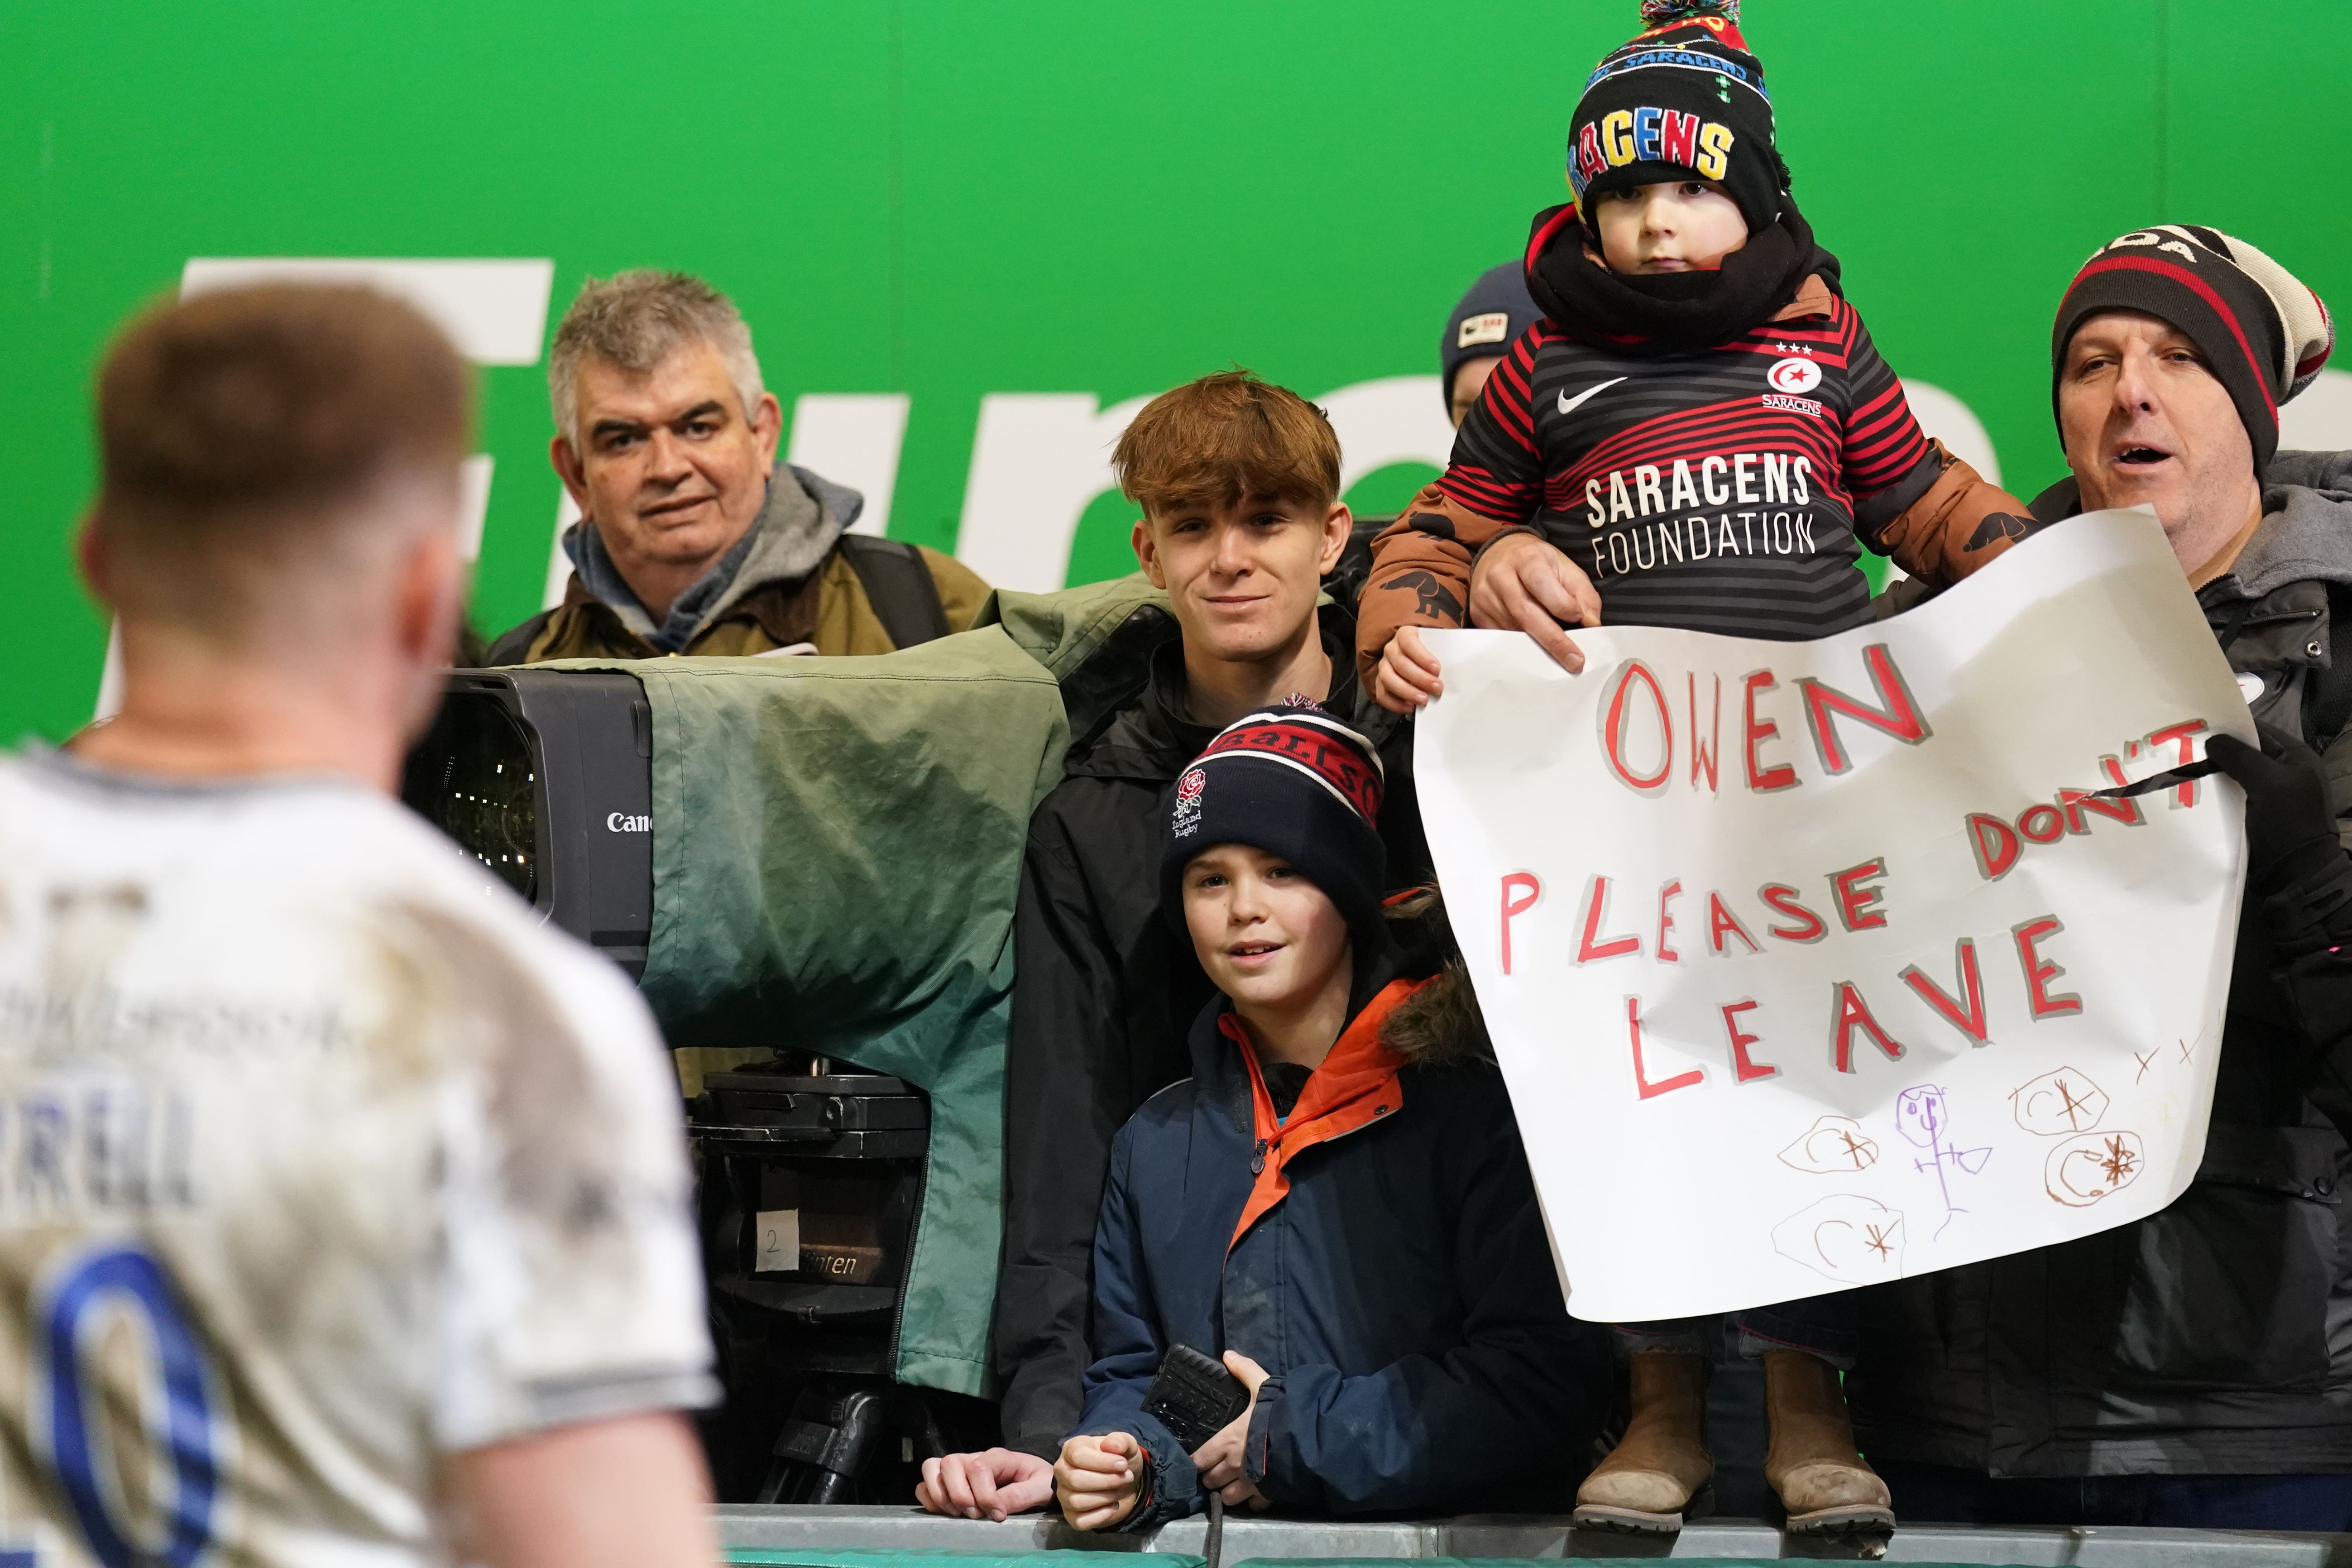 A young fan made his feelings clear to Owen Farrell at Welford Road